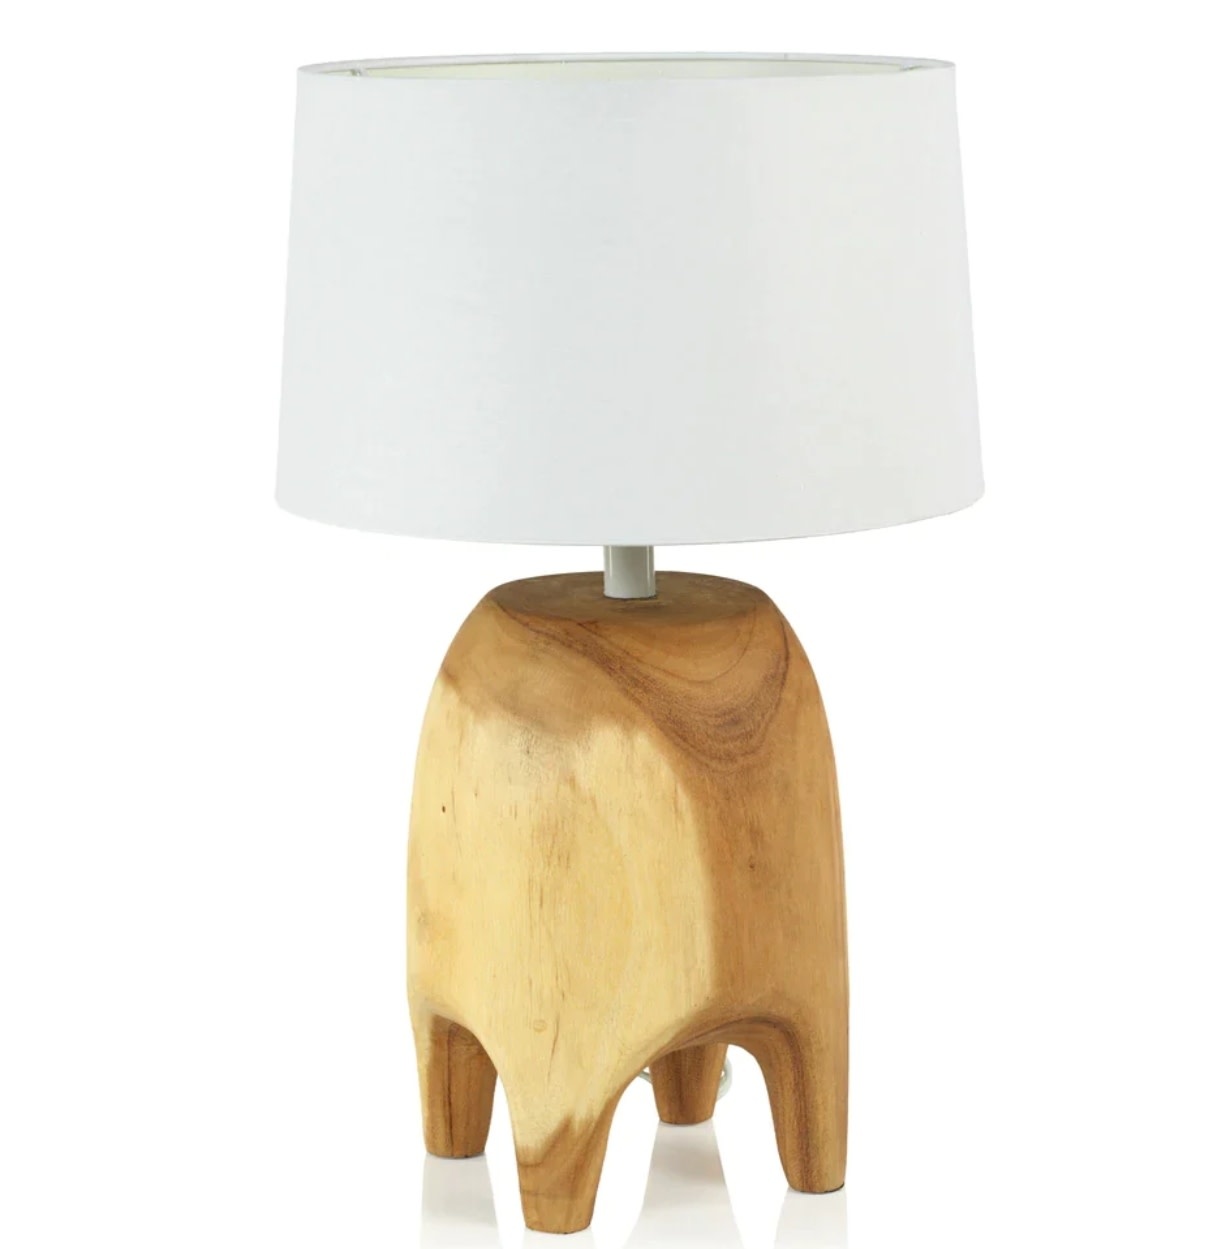 Samui Acacia Wood Table Lamp, 13" x21.75"  Available for local pick up